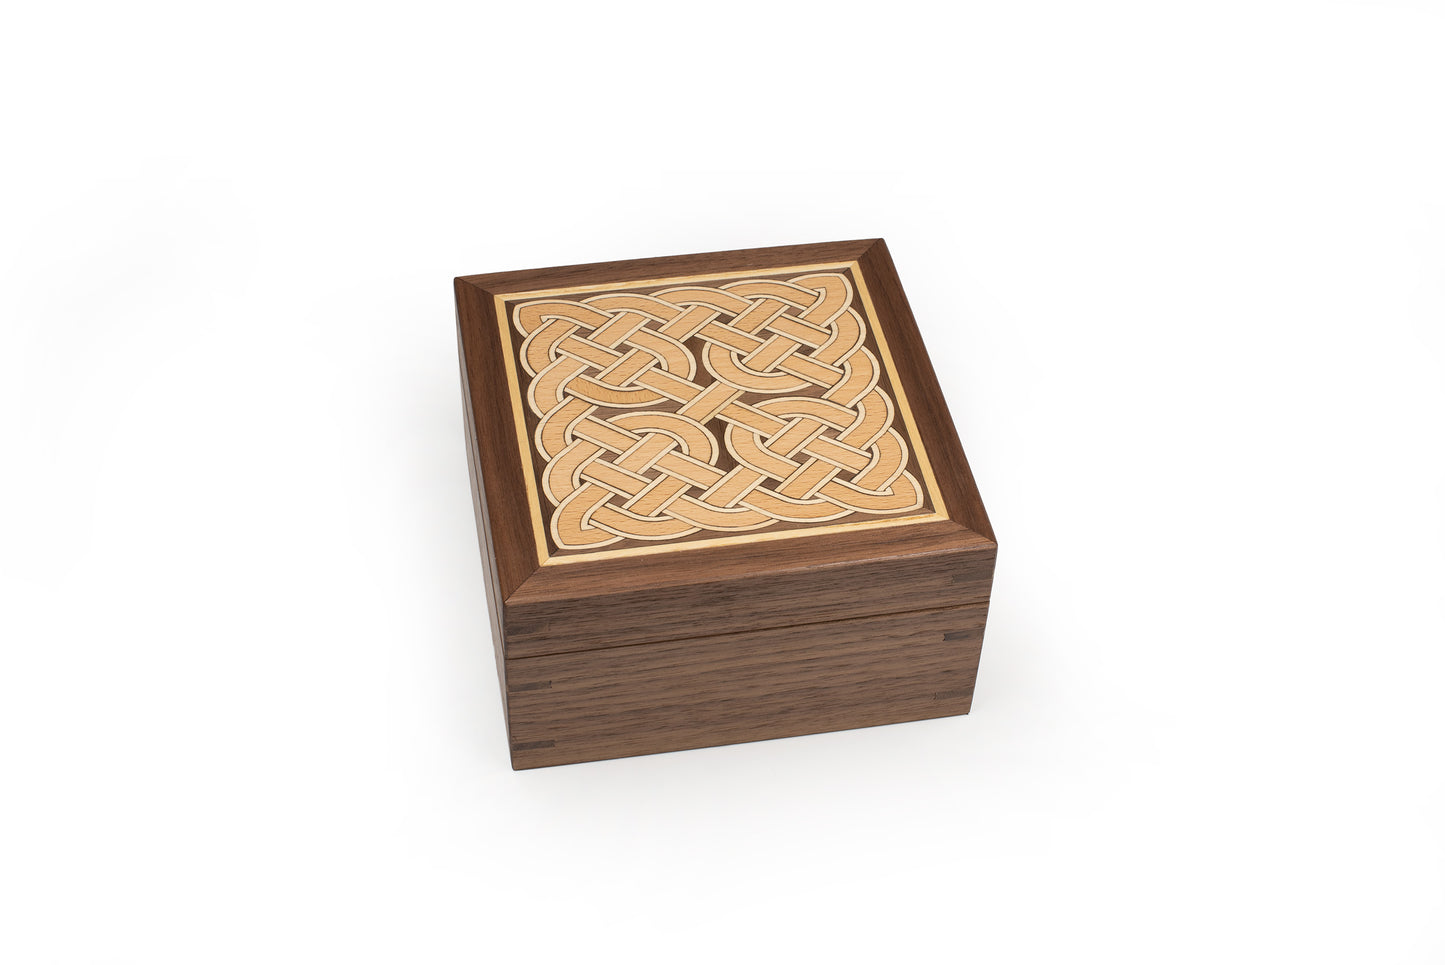 Keepsake Box, Handcrafted of Solid Walnut with Beech Celtic Pictish Marquetry inlays, optional Personalised engraving